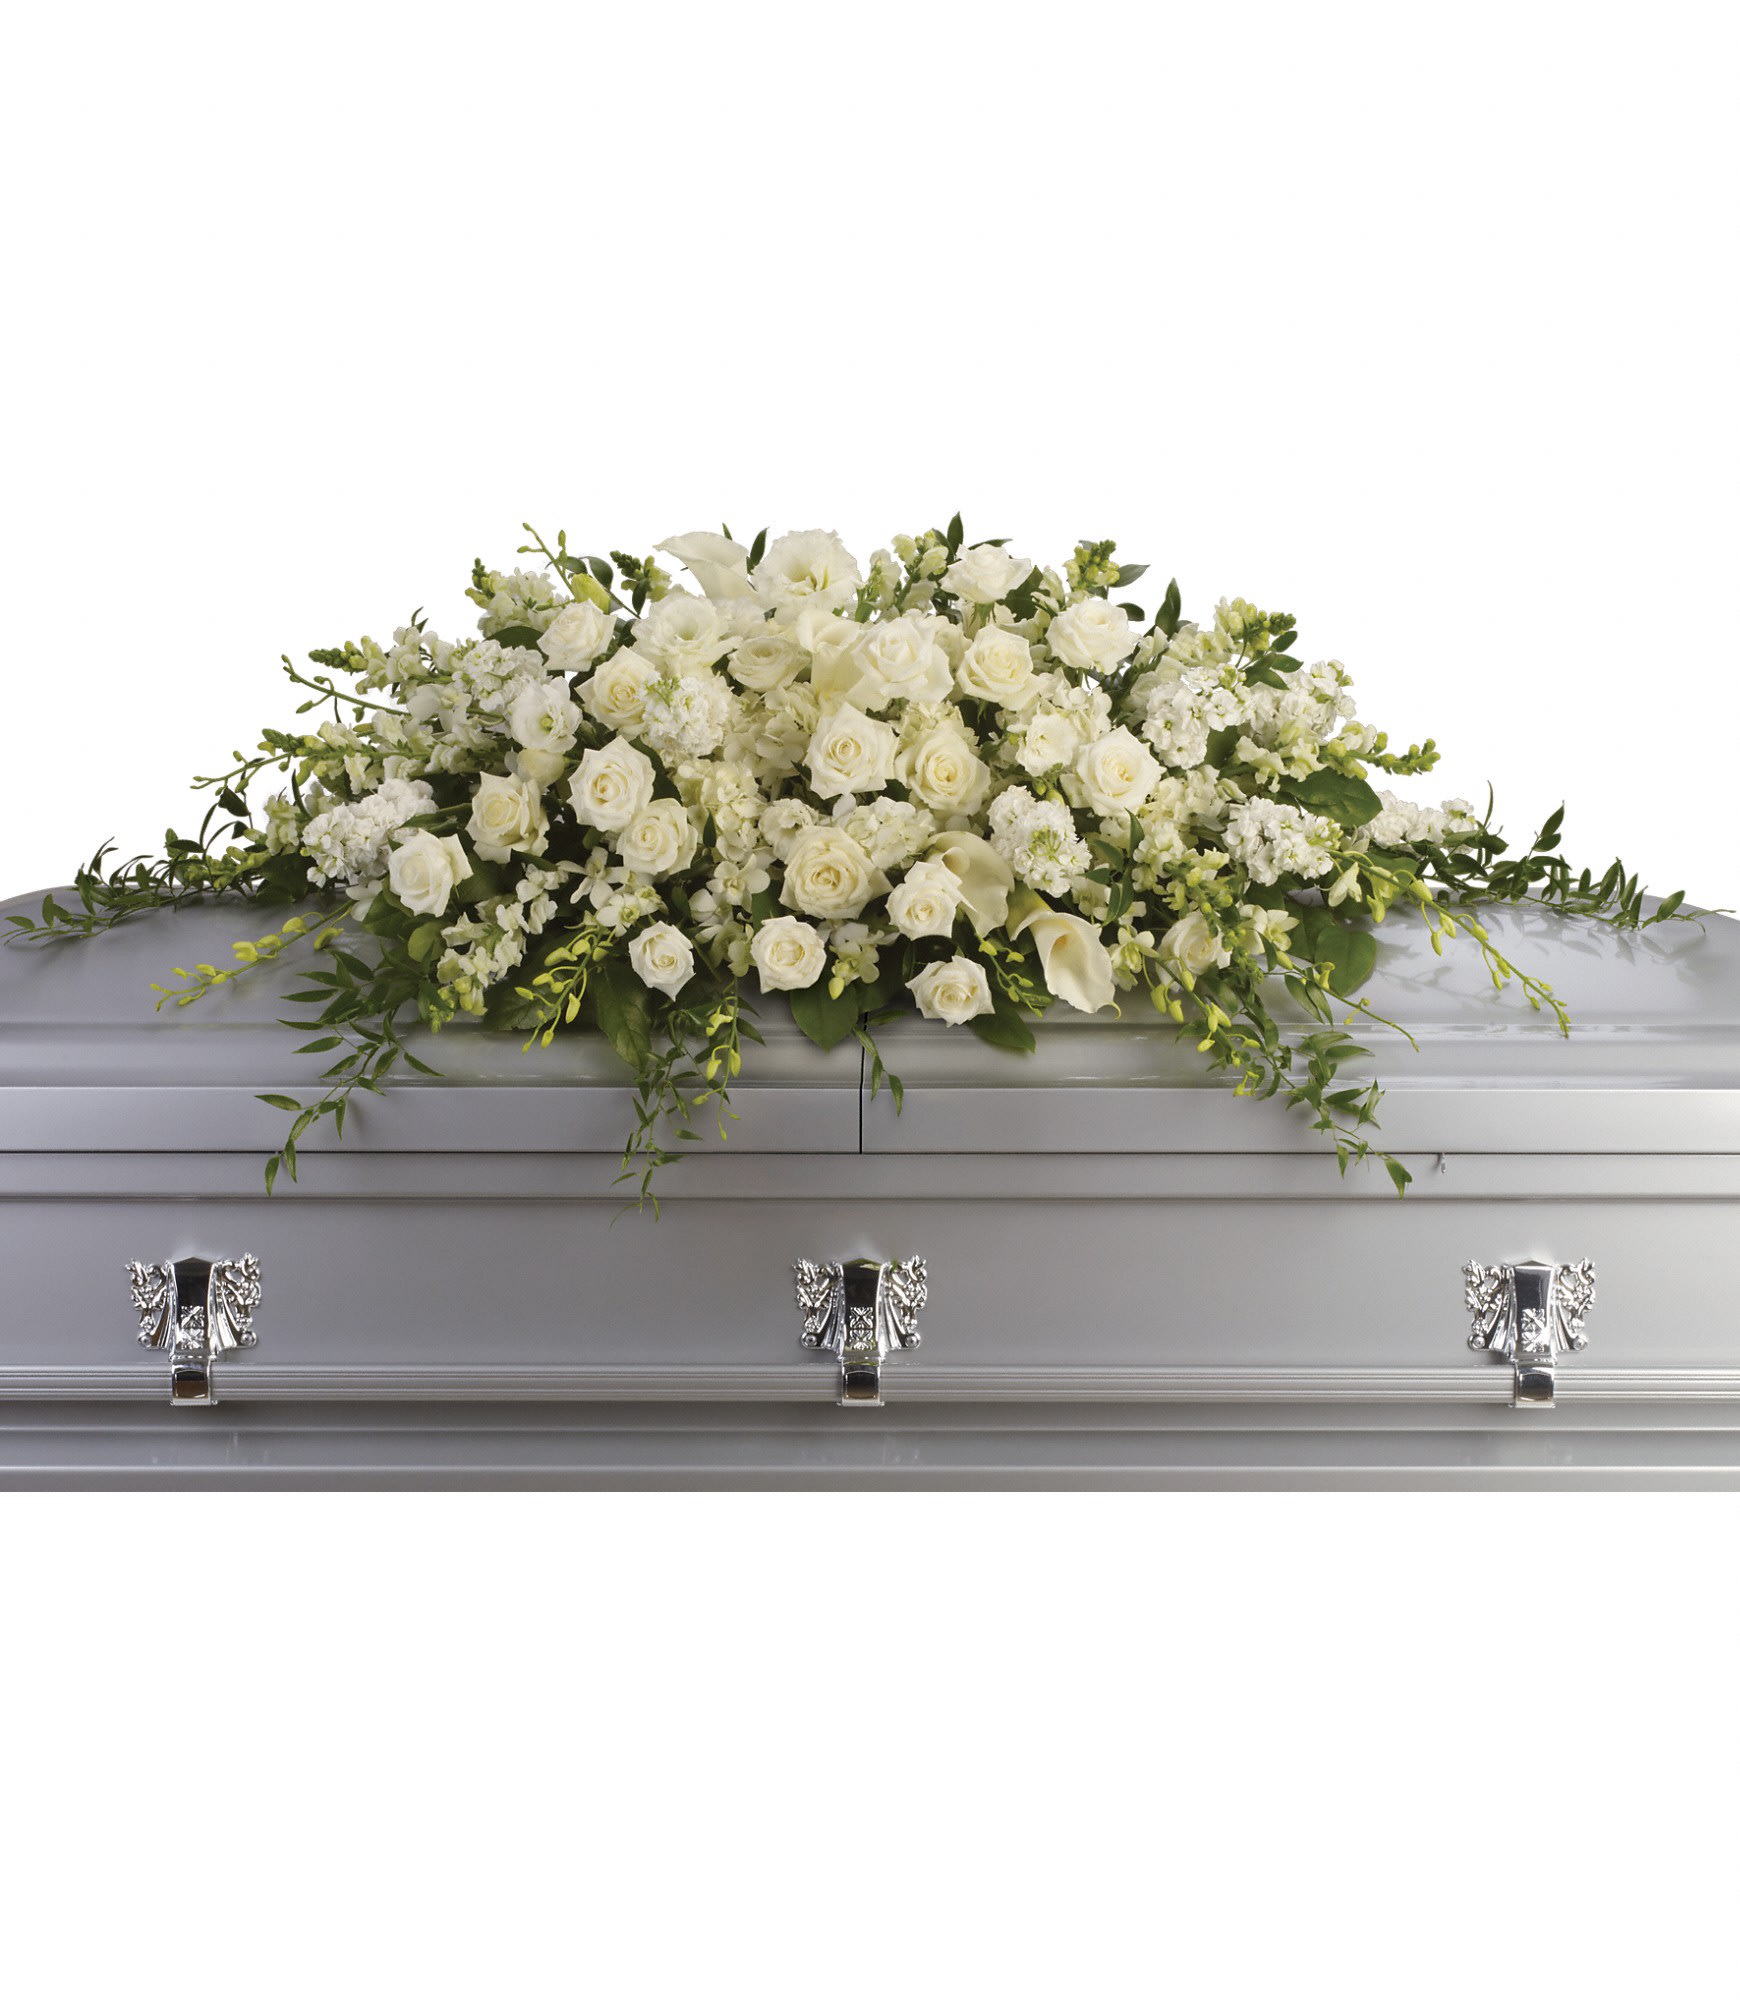 Purity and Peace Casket Spray - A stunning yet respectful testament in white, this spray for the casket includes roses, orchids, calla lilies and hydrangea accented by soft, trailing greens. 